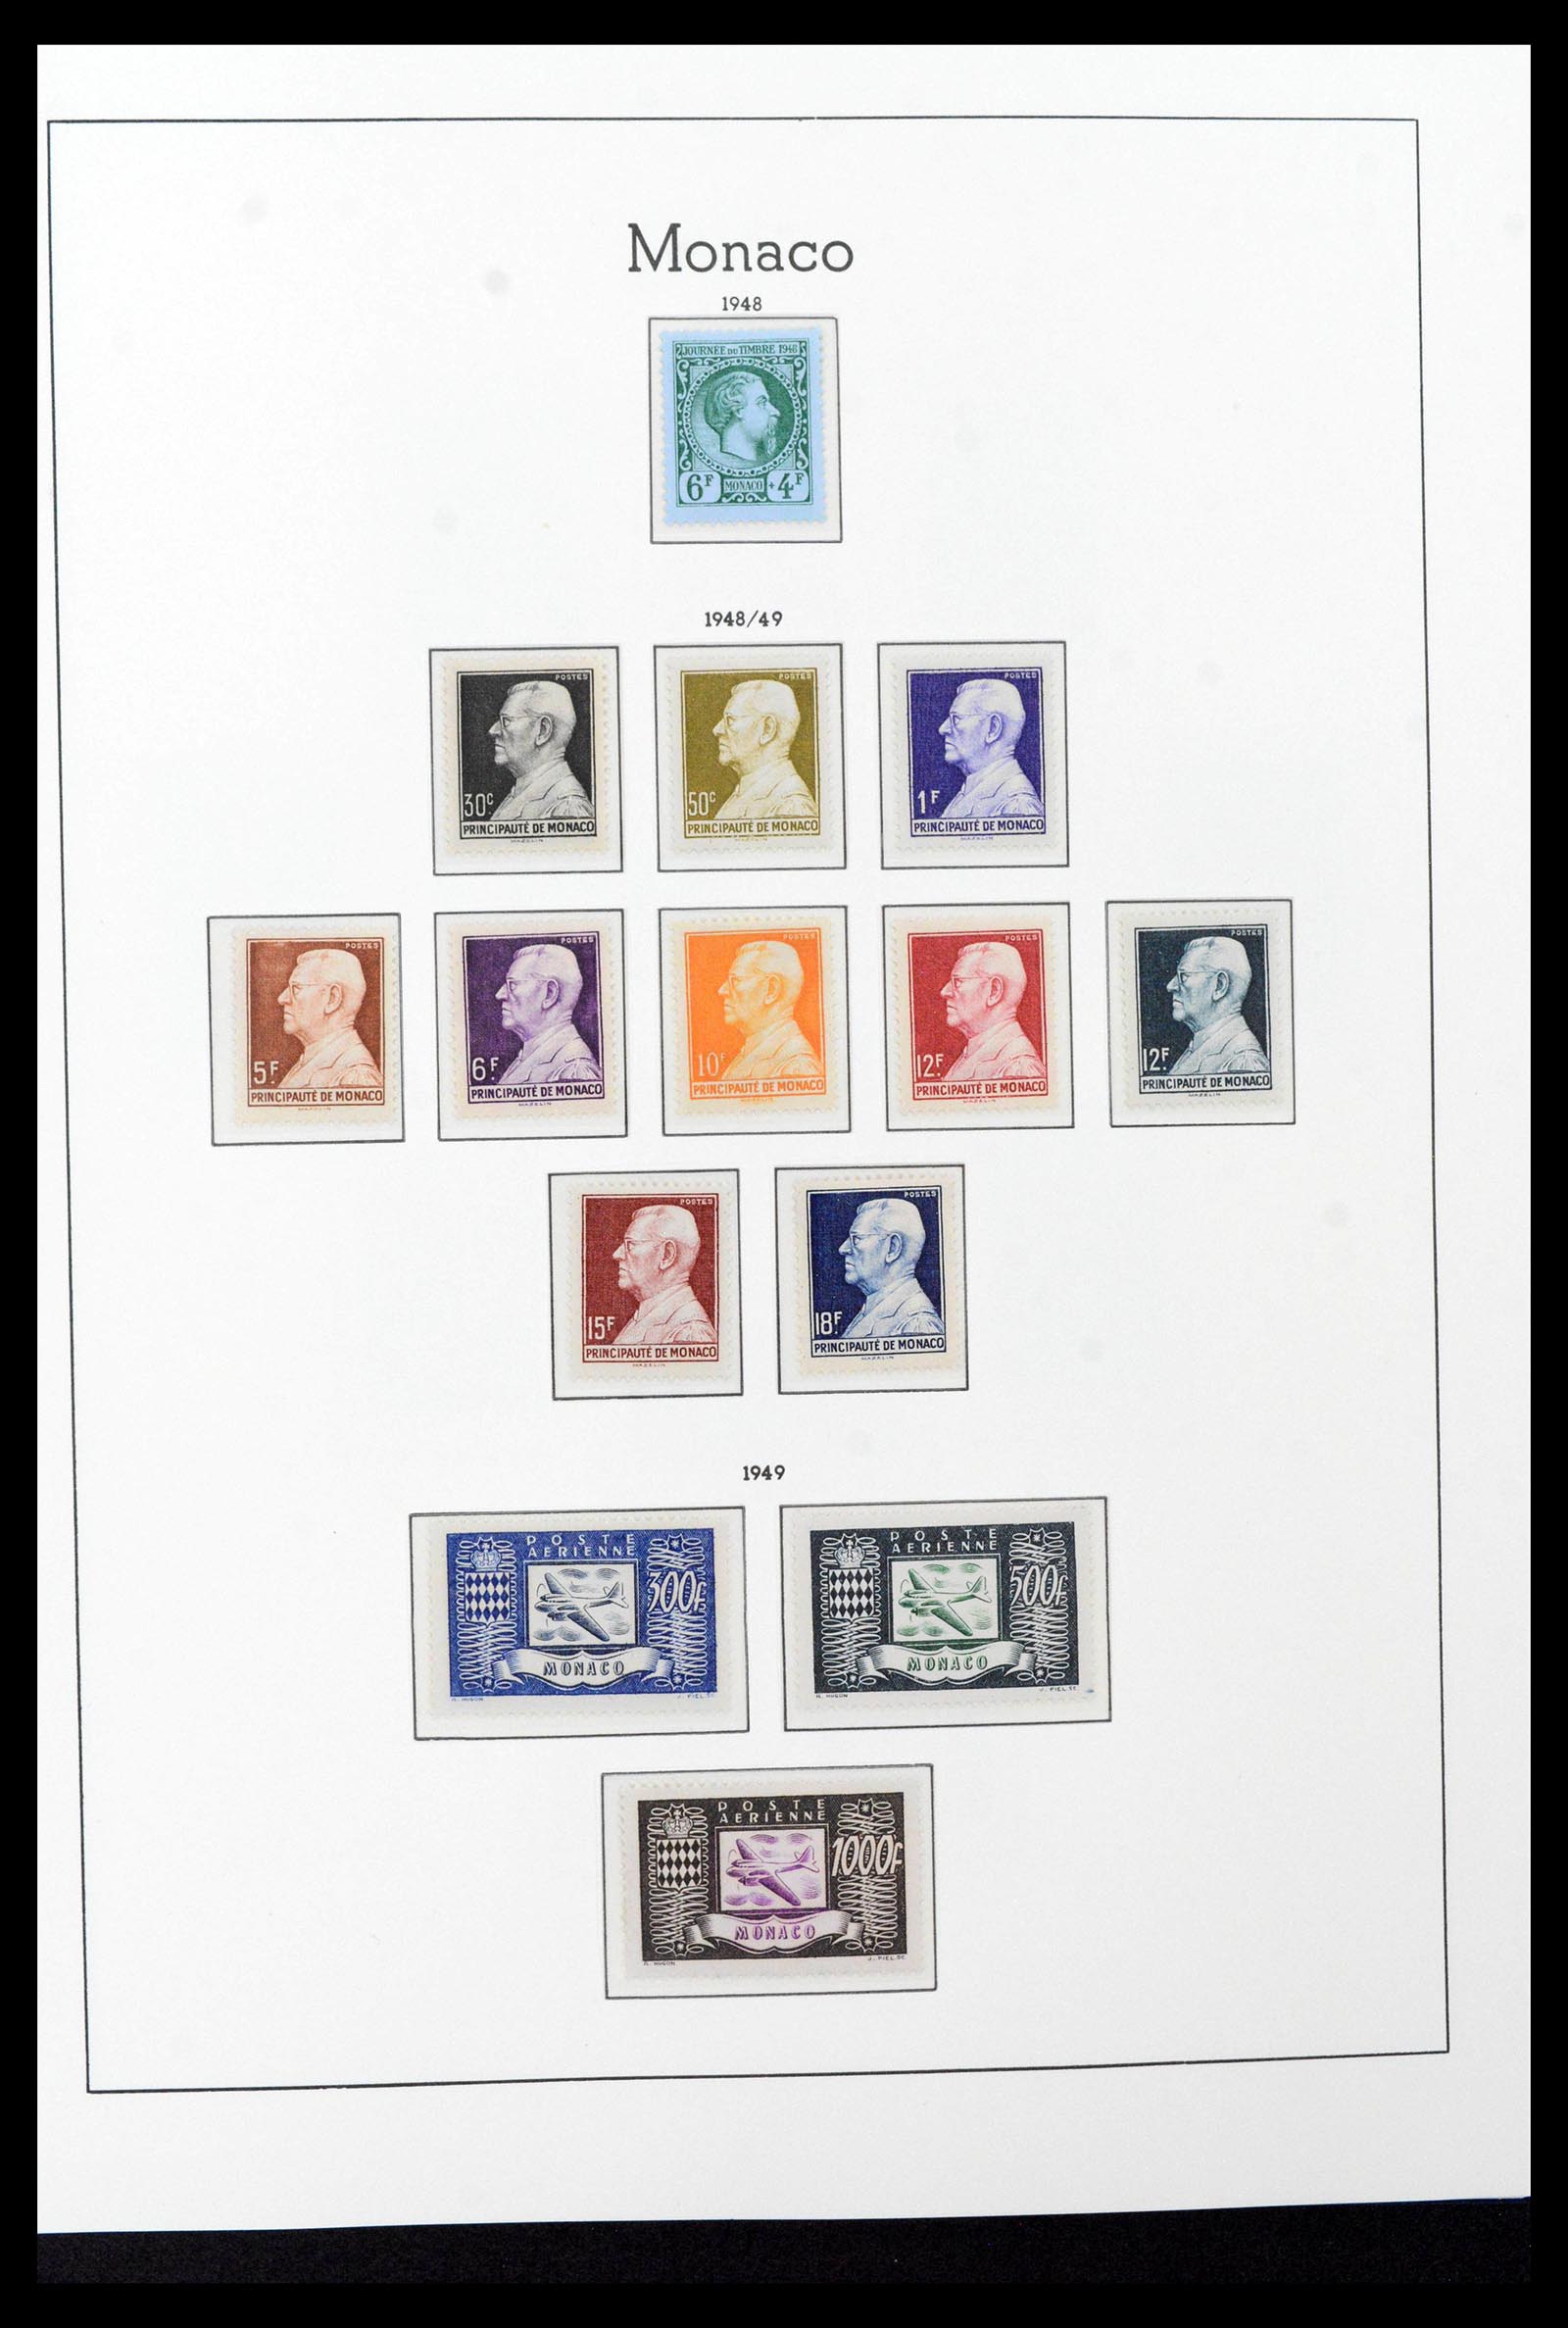 39390 0037 - Stamp collection 39390 Monaco complete 1885-1990.